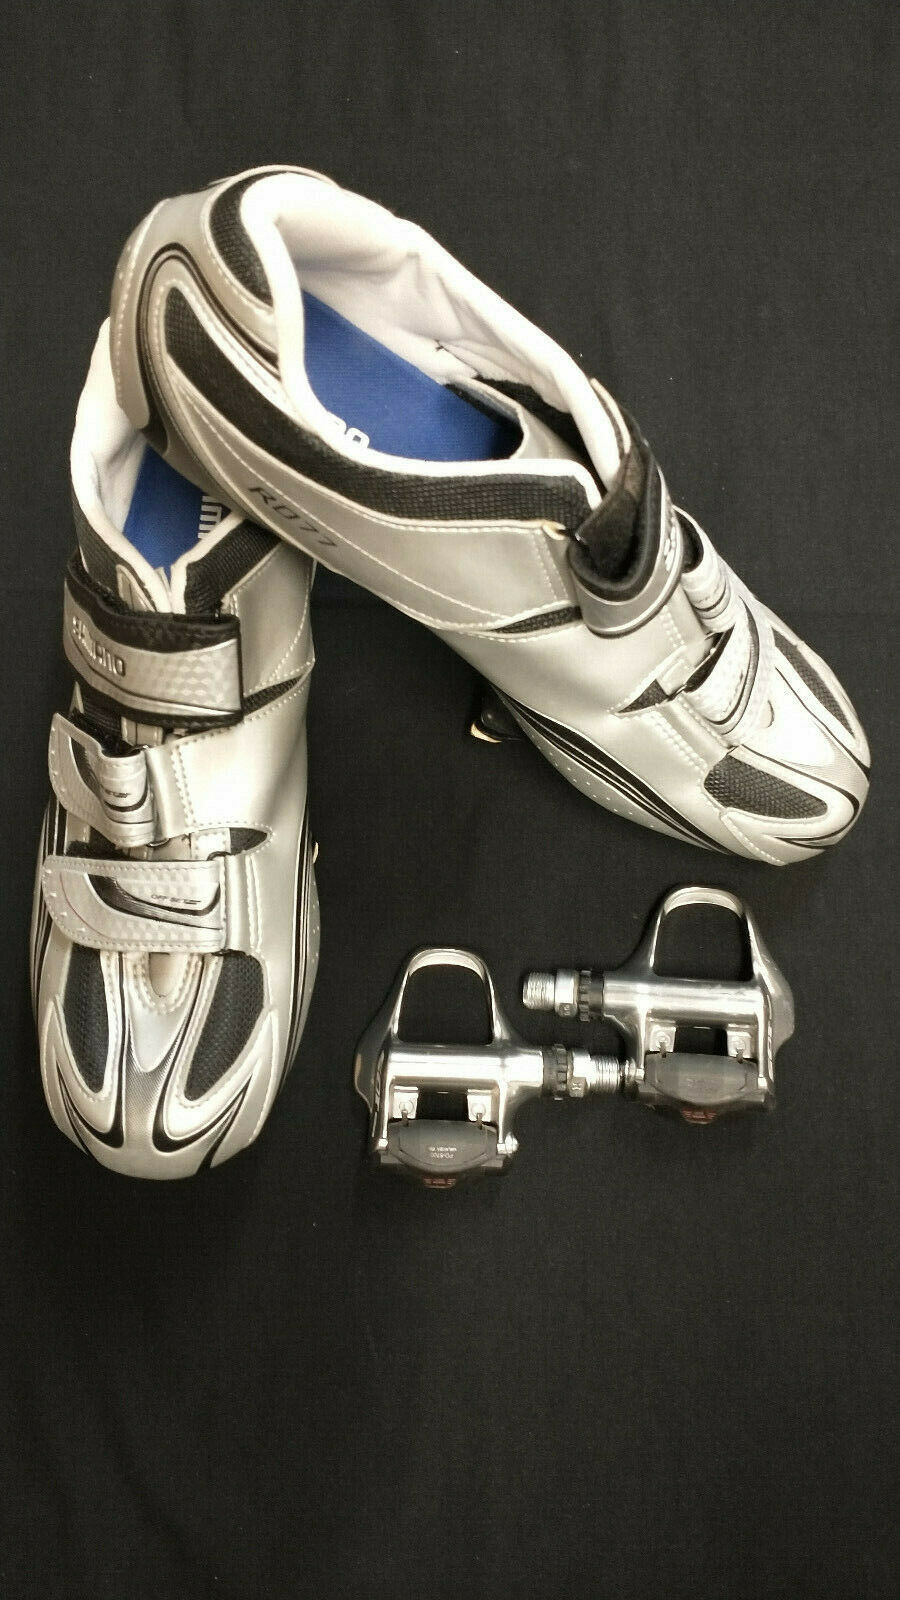 Shimano RO77 Road Bike Shoes with Shimano 105 road pedals and cleats